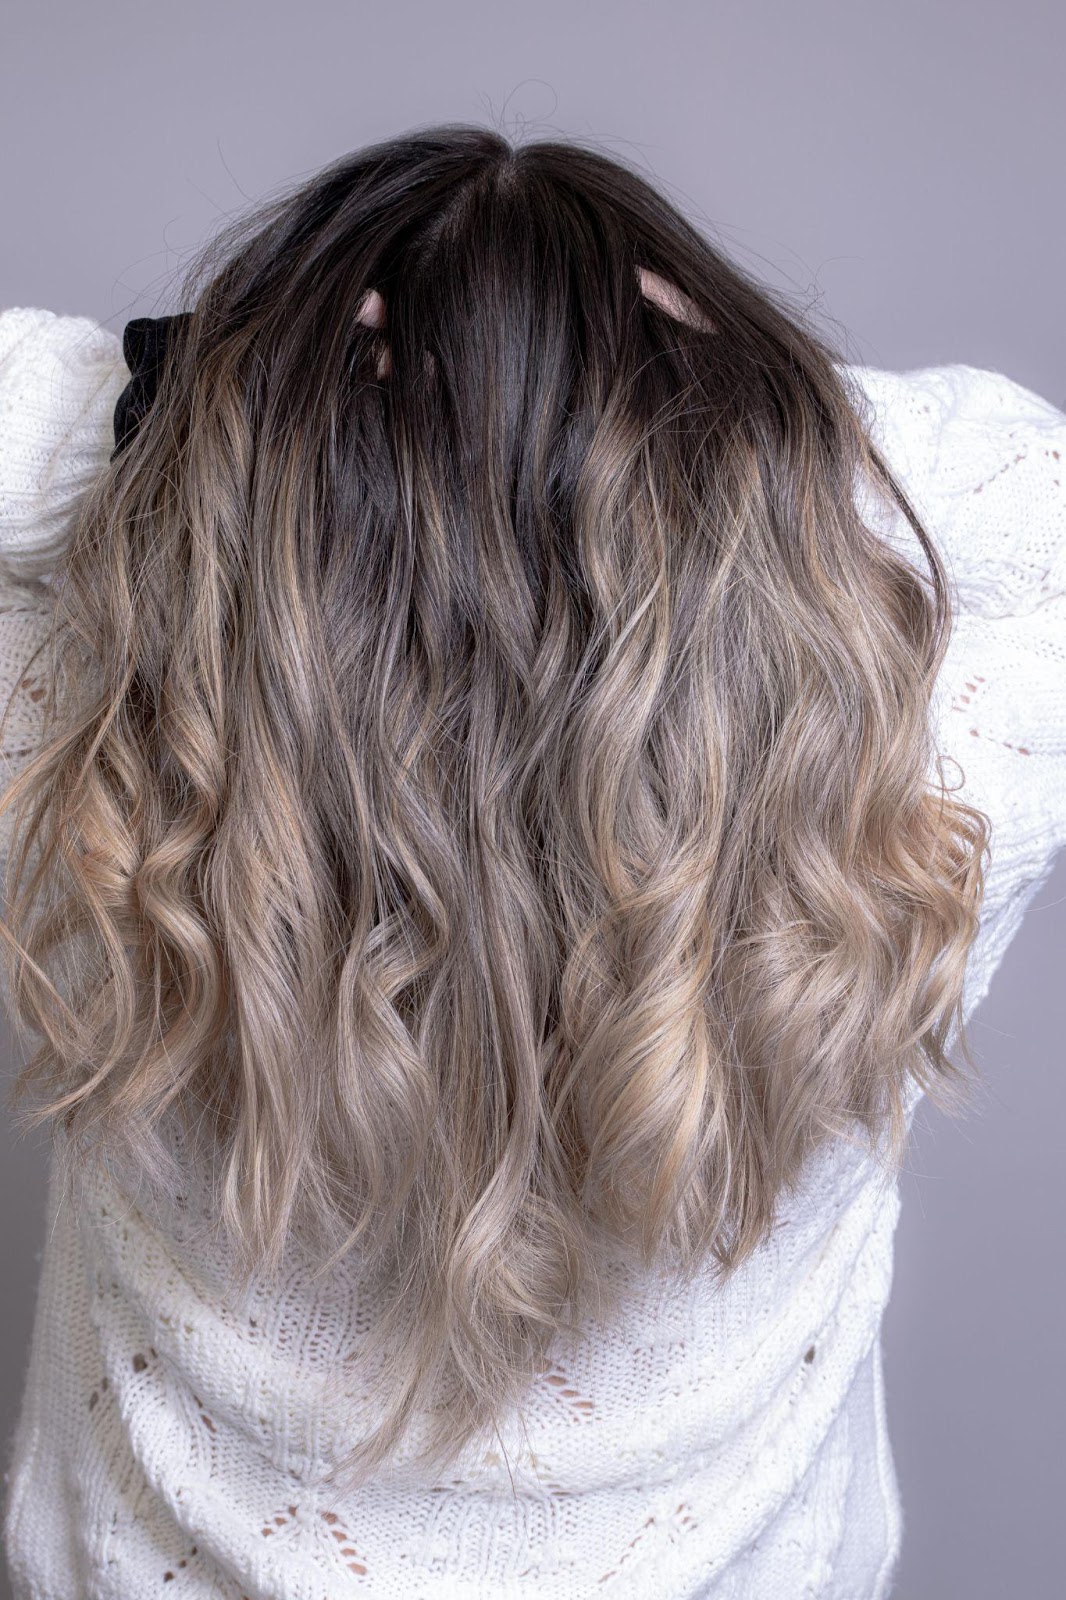 Silver Locks: How To Rock This Stunning Hair Color